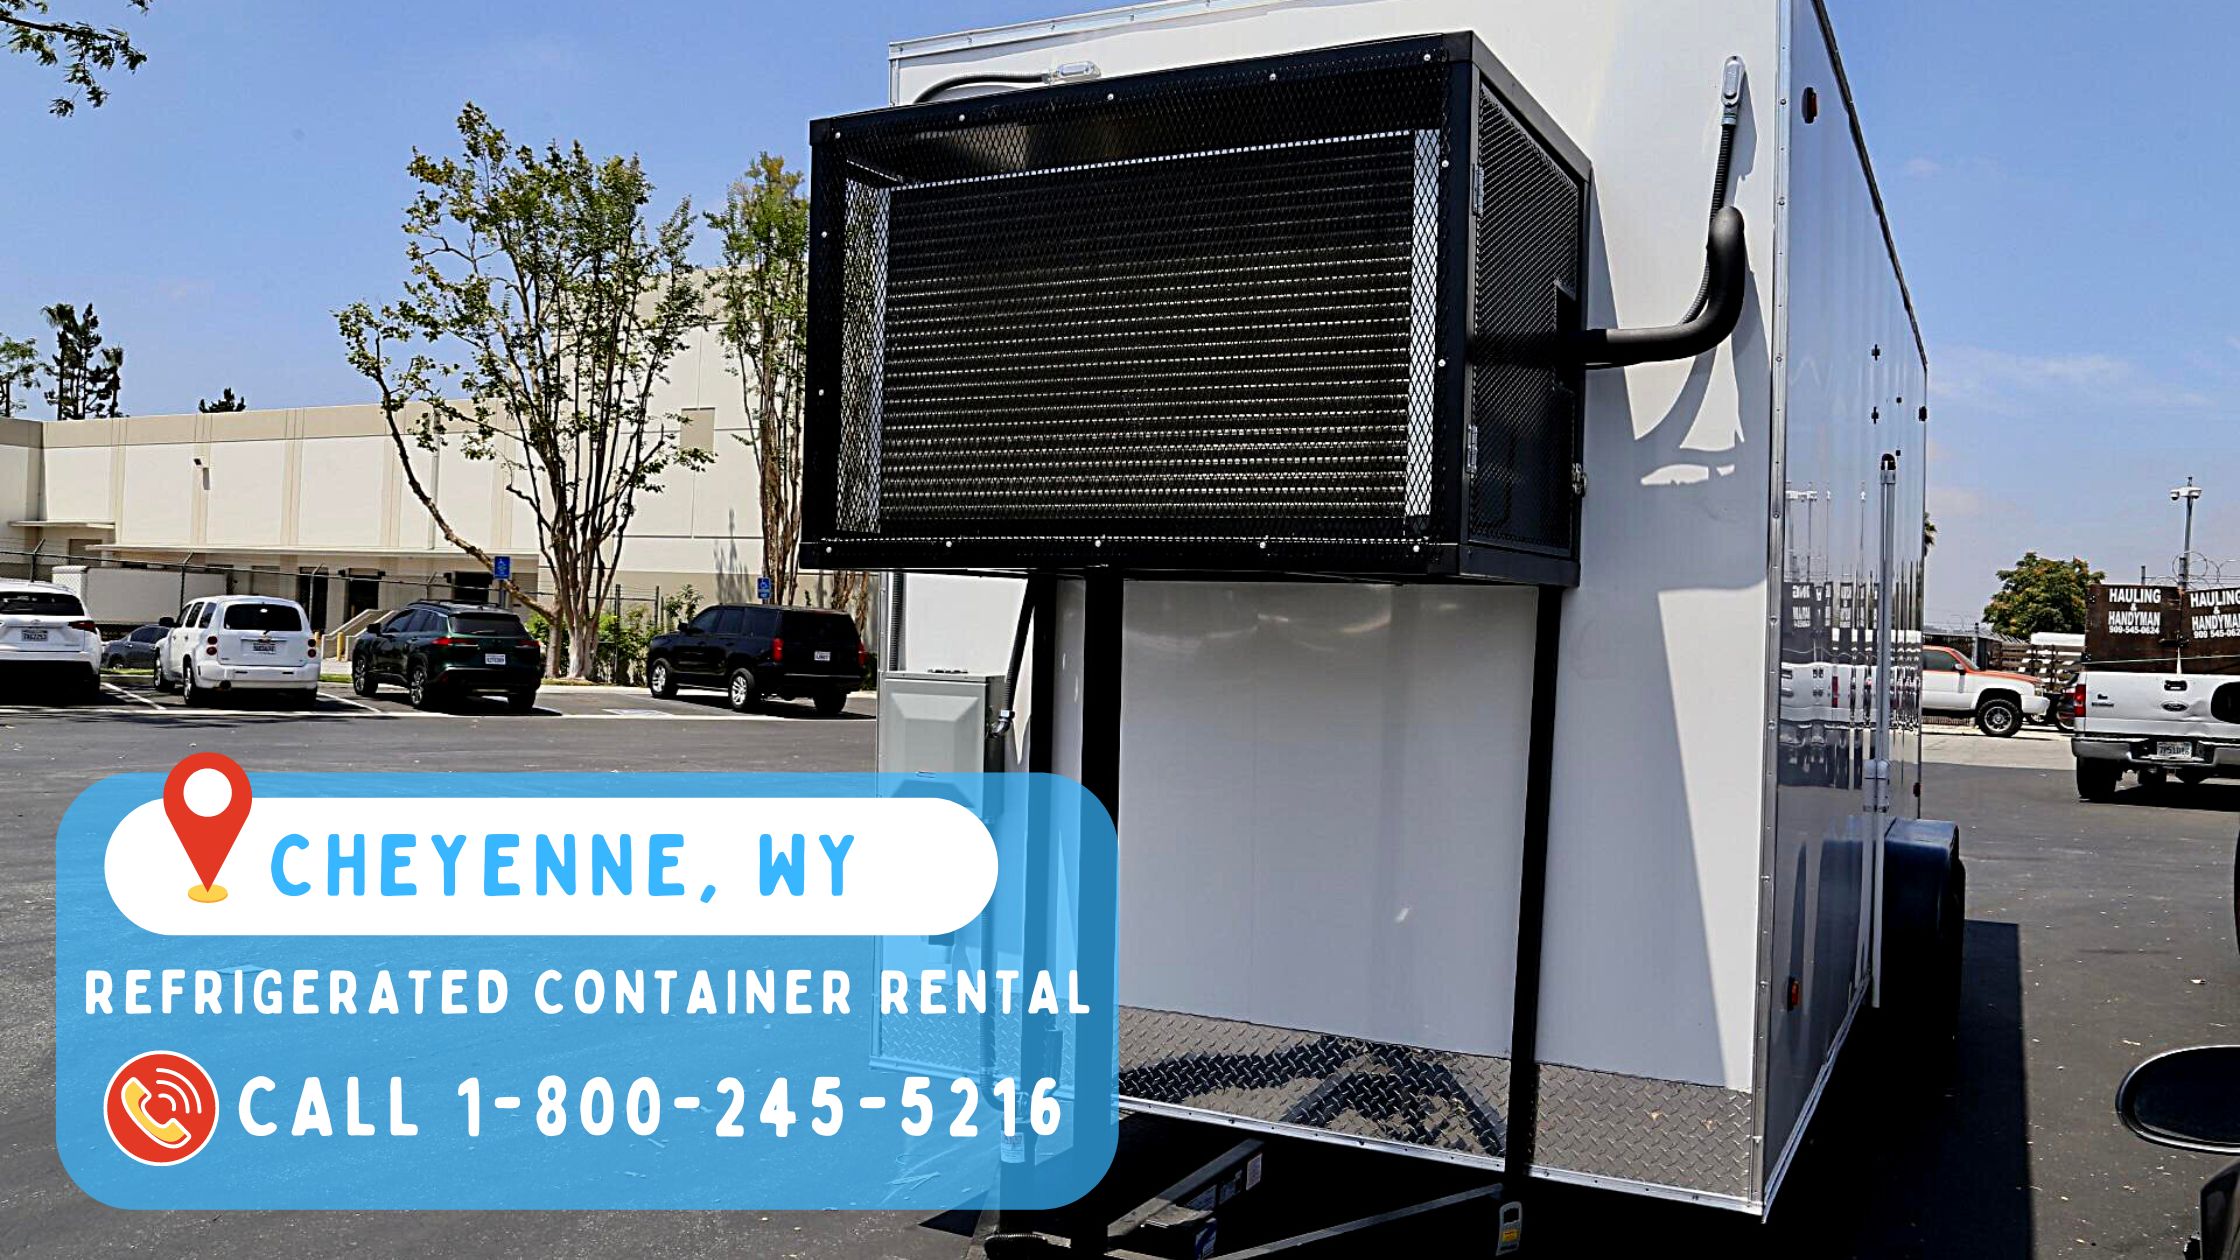 Refrigerated Container Rental in Cheyenne